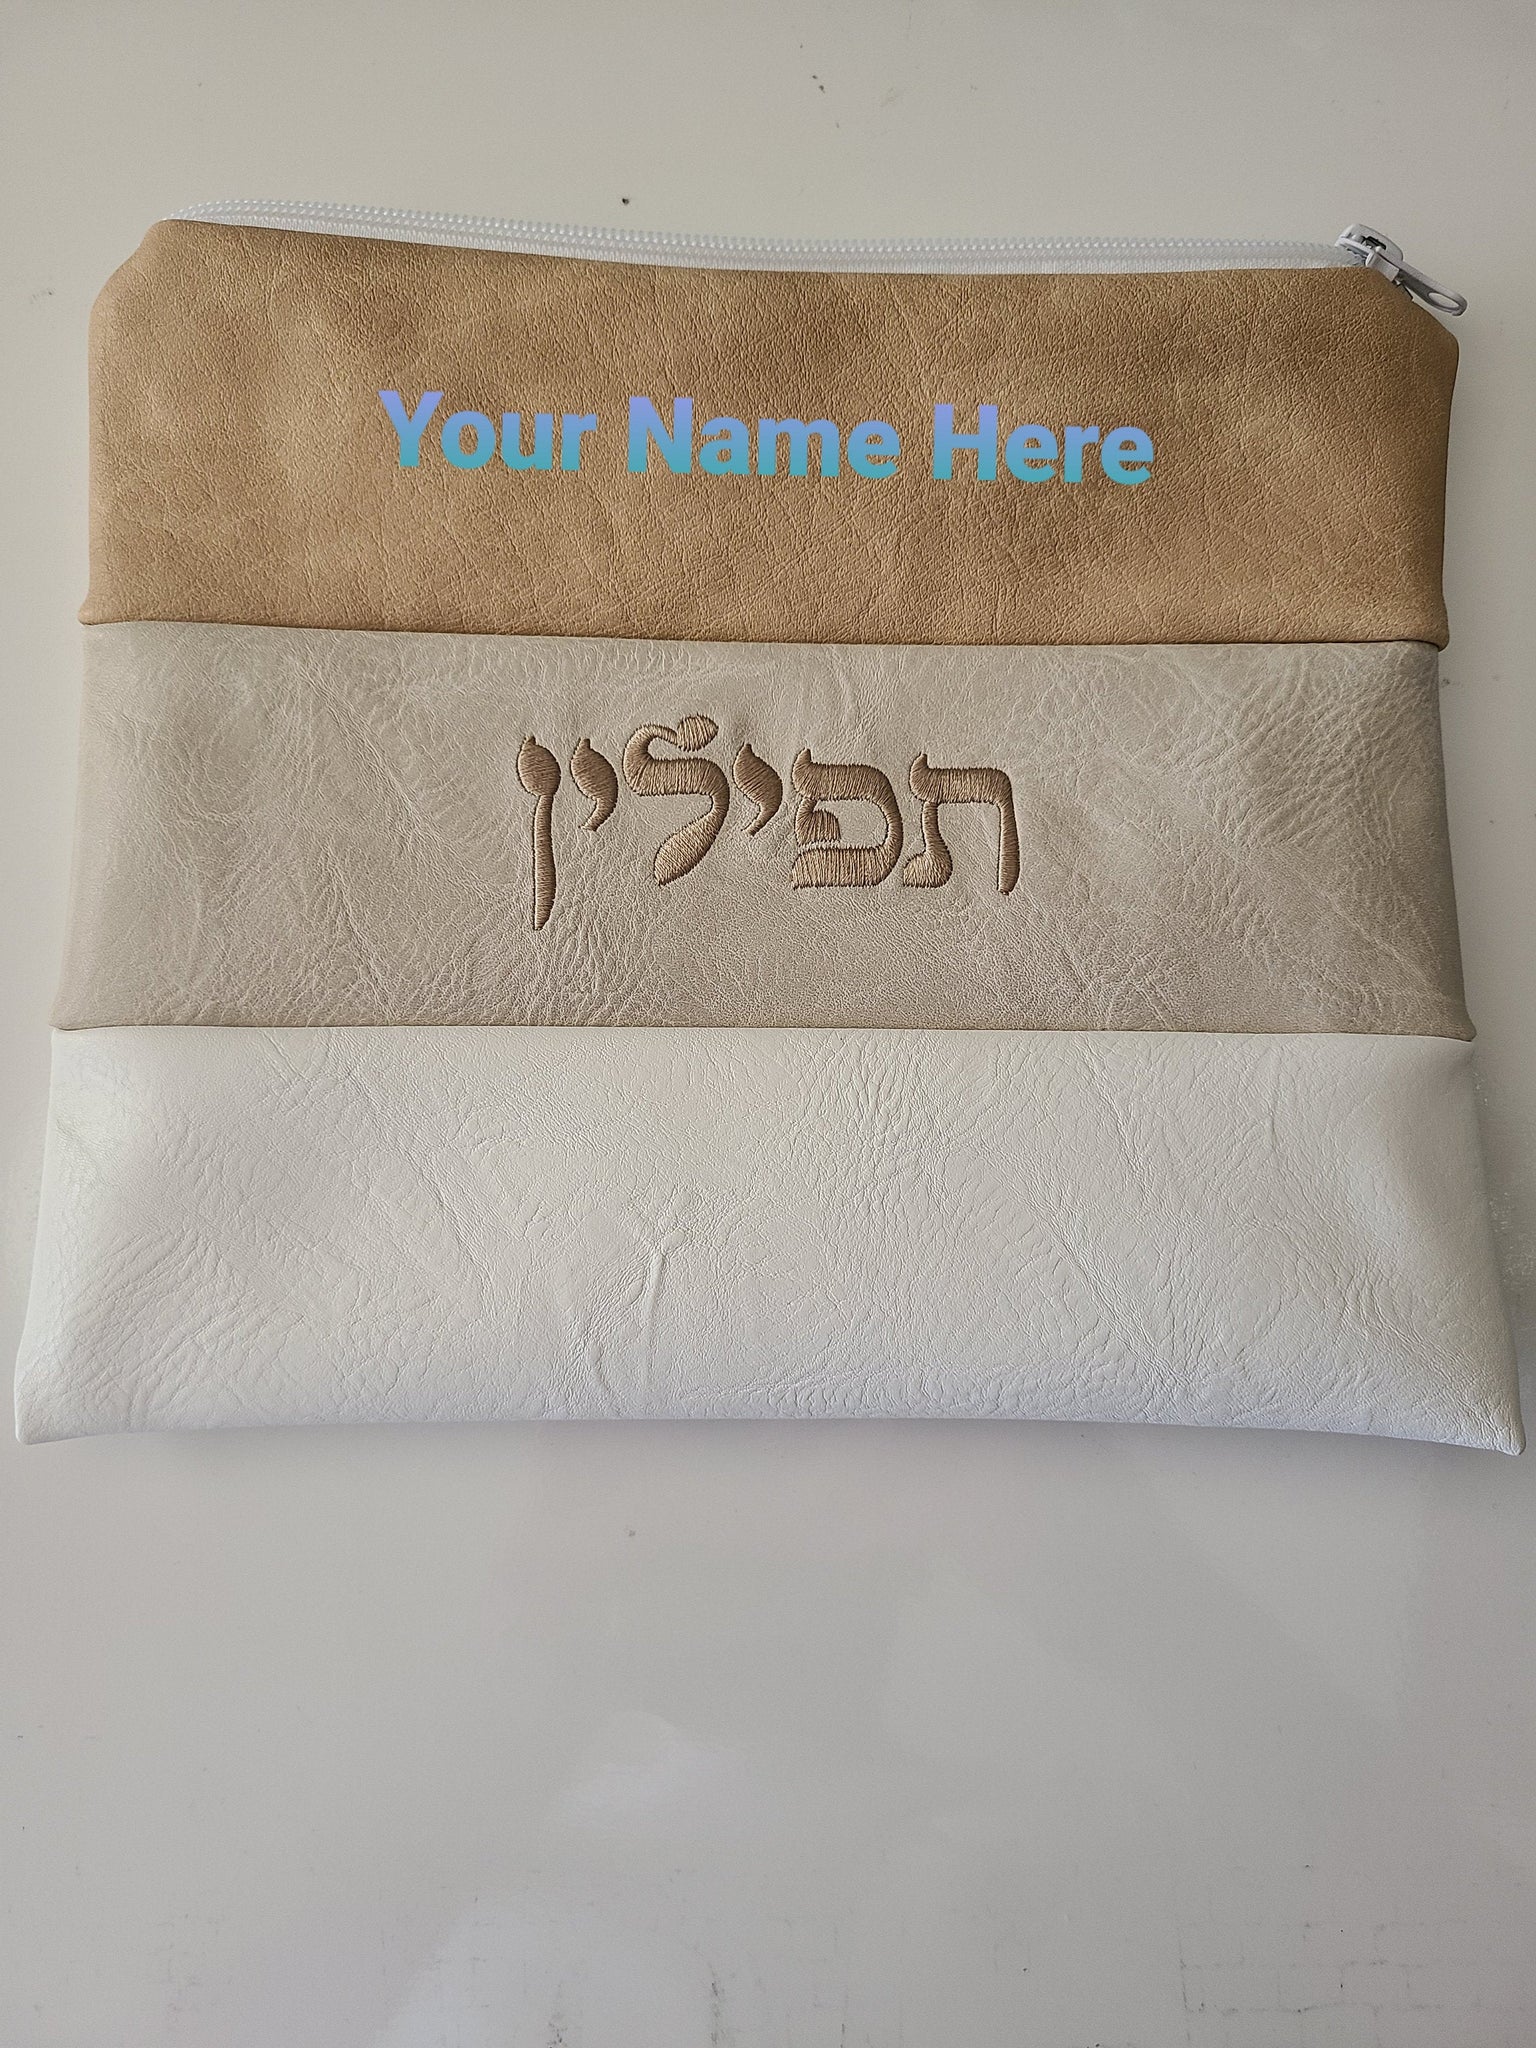 New Bar Mitzvah Tefillin Bag  with Personalized Name